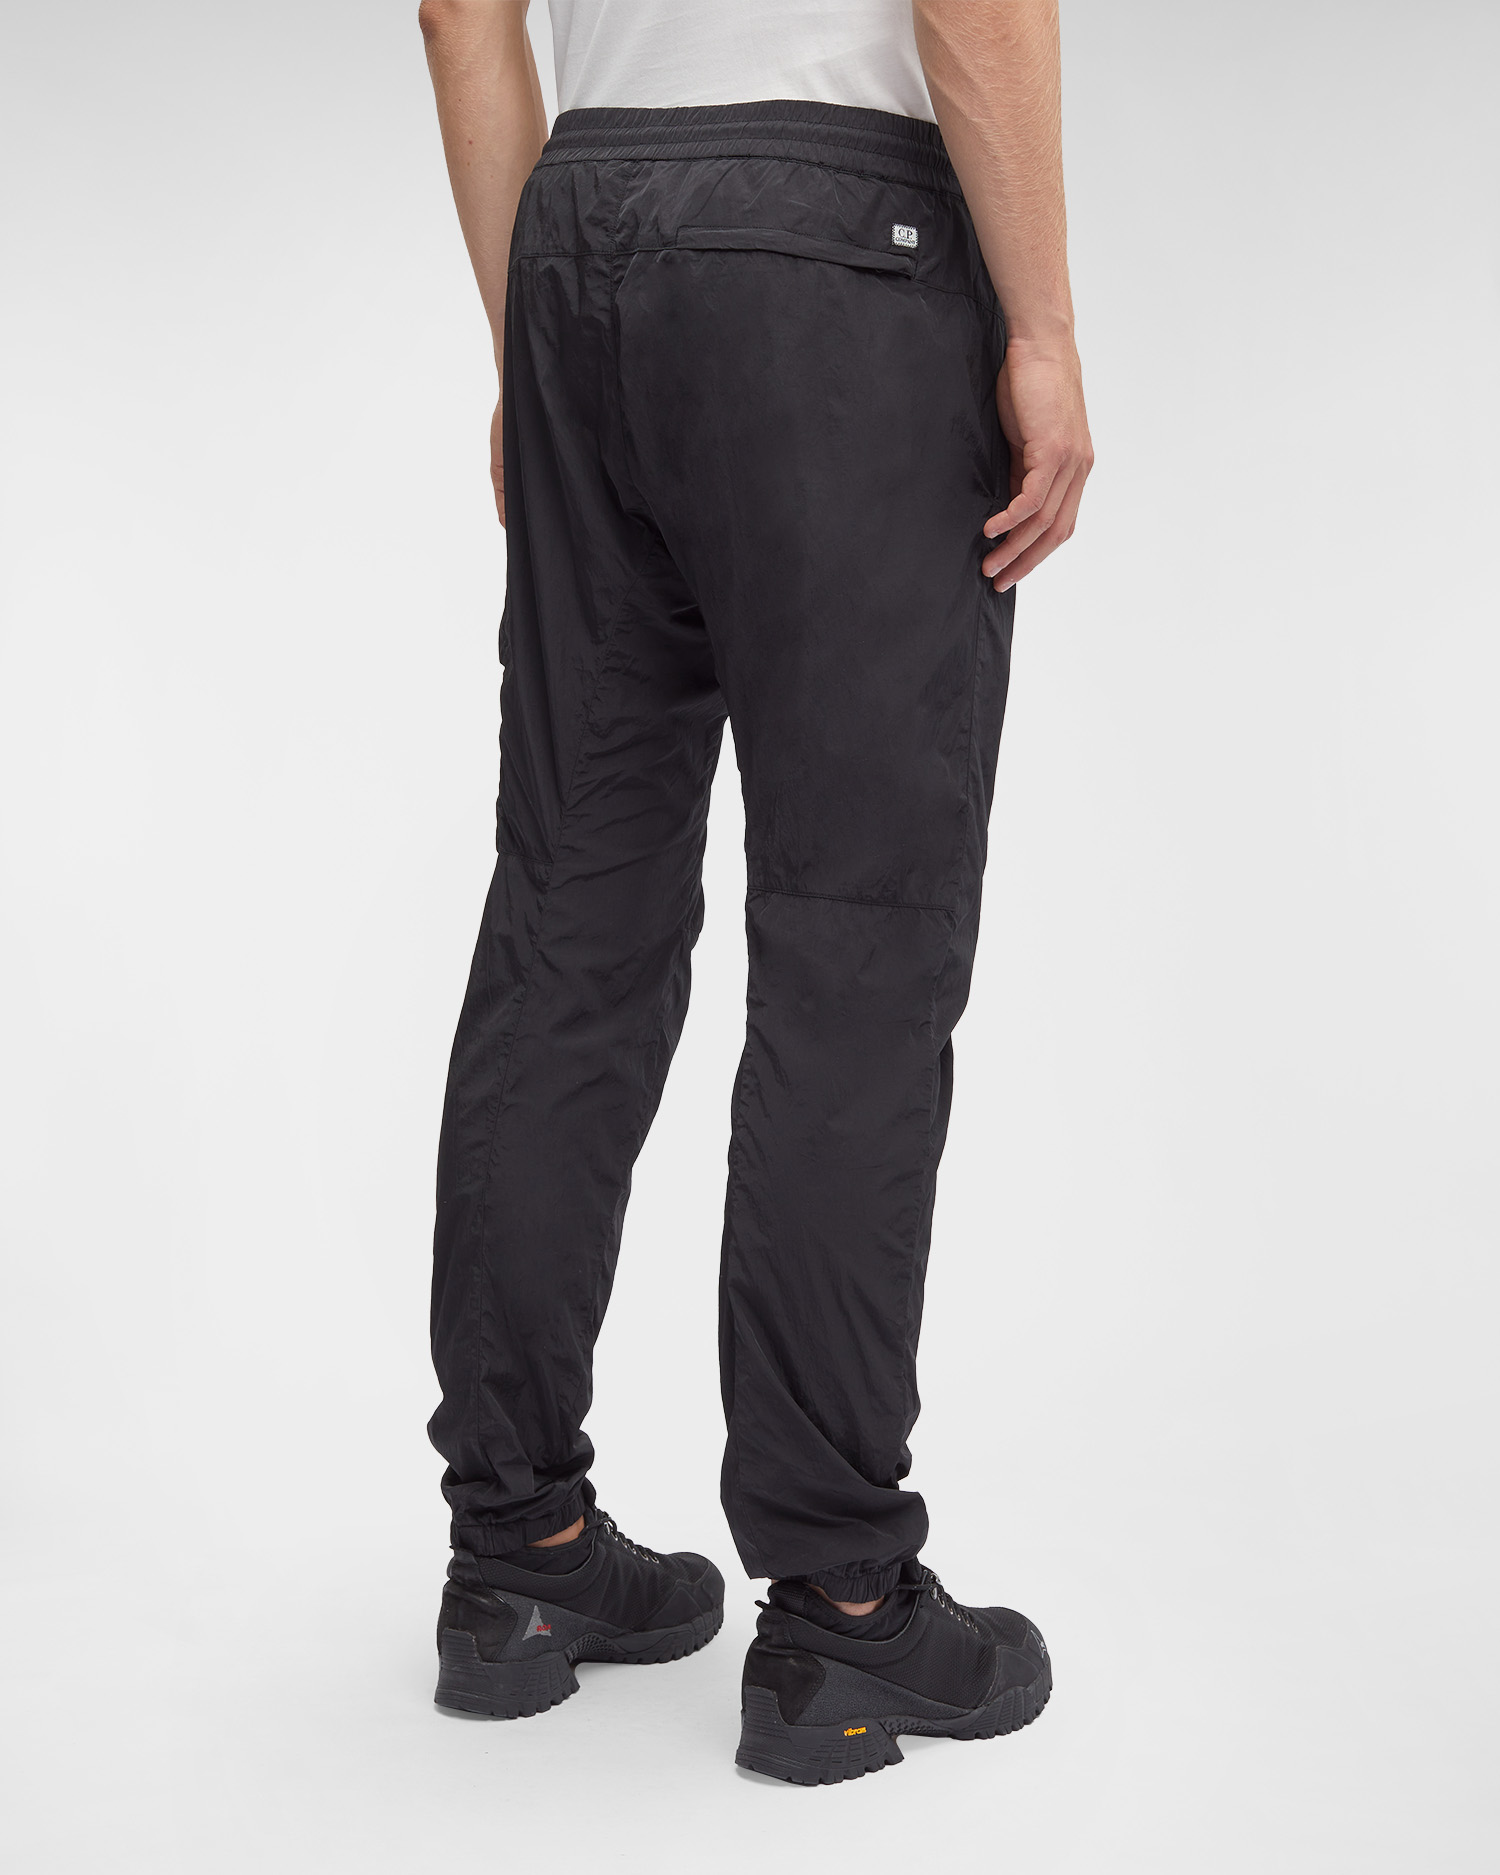 C.P COMPANY chino pants MADE IN ITALY-